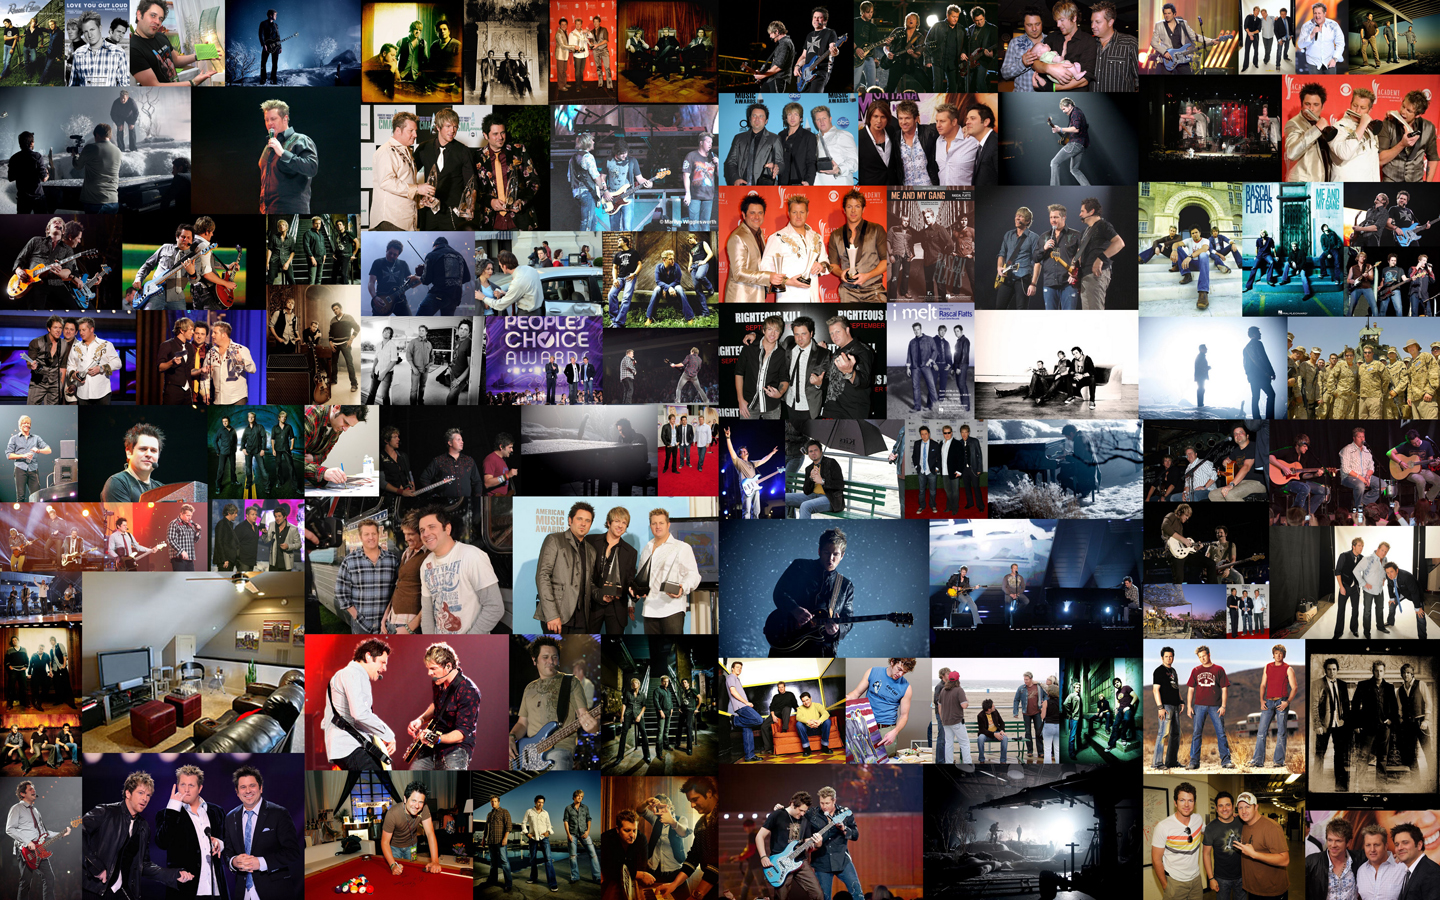  netrascal flatts photo collage 1 wallpapers 14589 1440x900 1html 1440x900